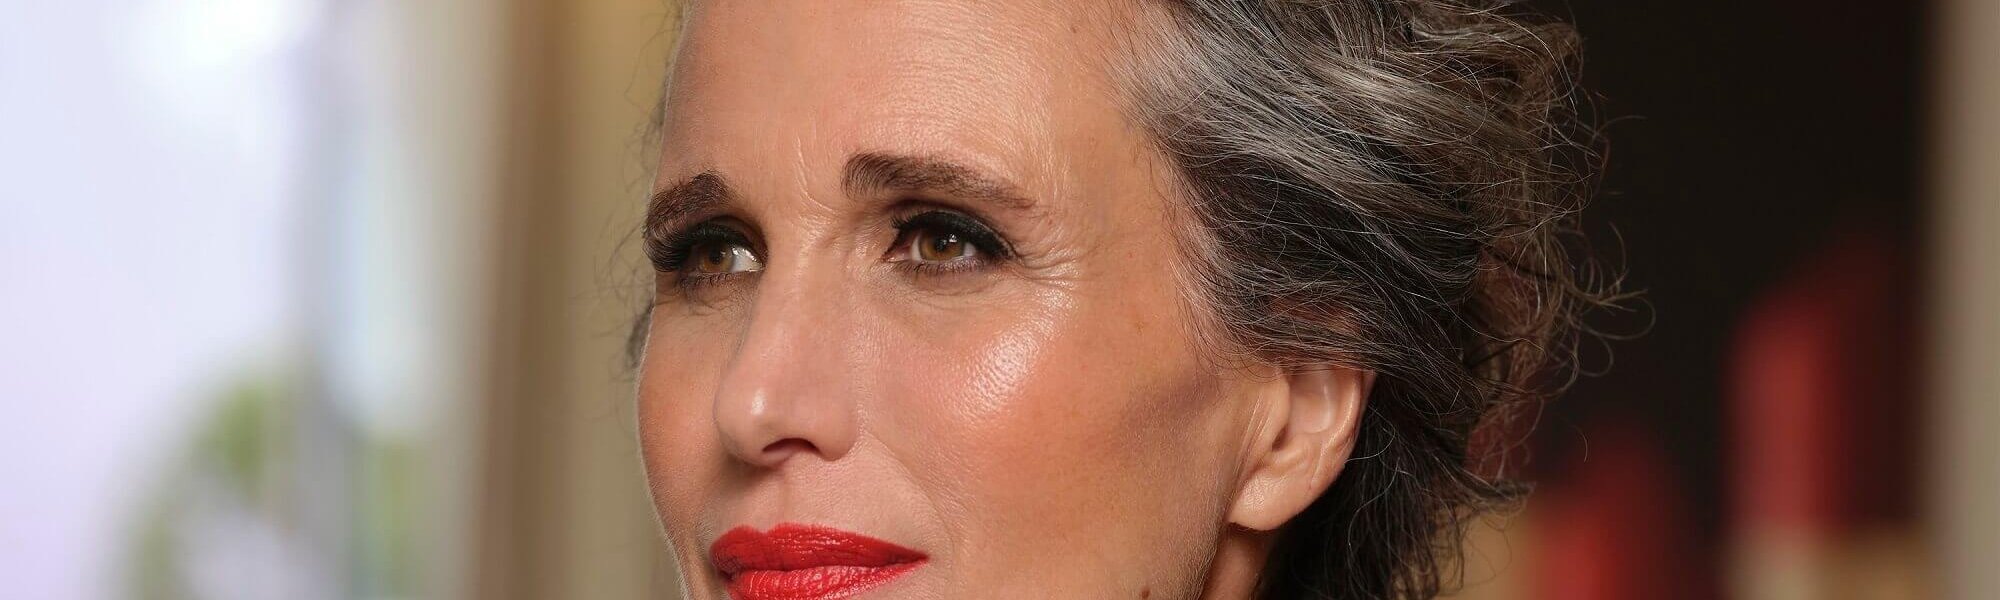 trucco-over-50